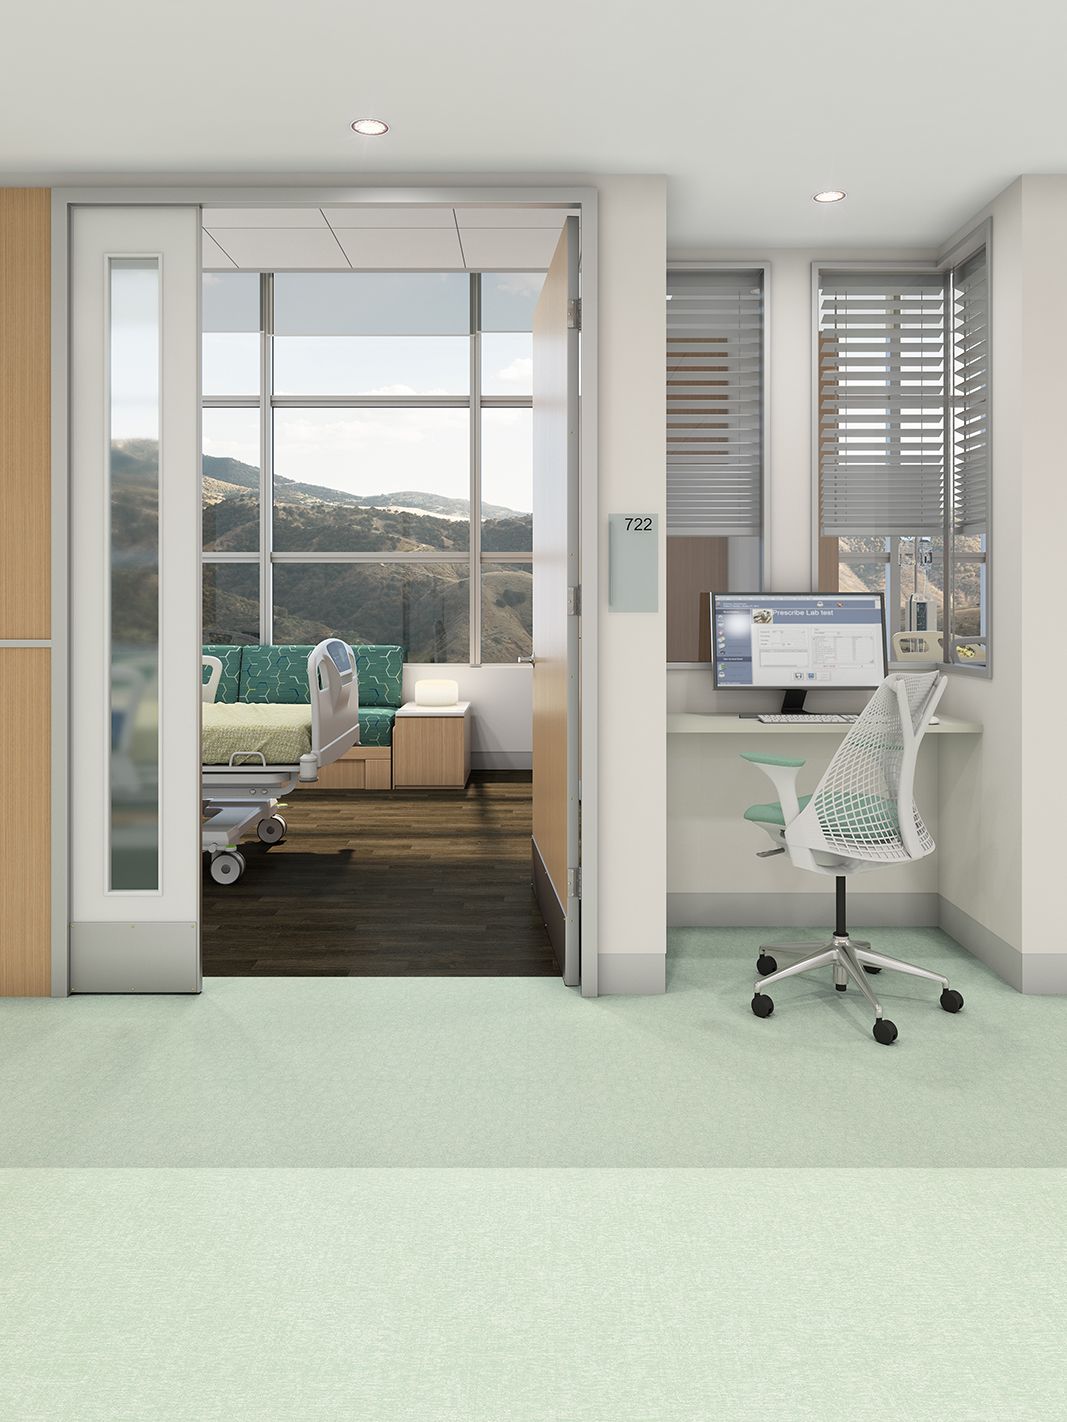 Interface's Spike-tacular, Bloom with a View and Continual Woodgrains vinyl sheet in hospital corridor and patient room imagen número 1